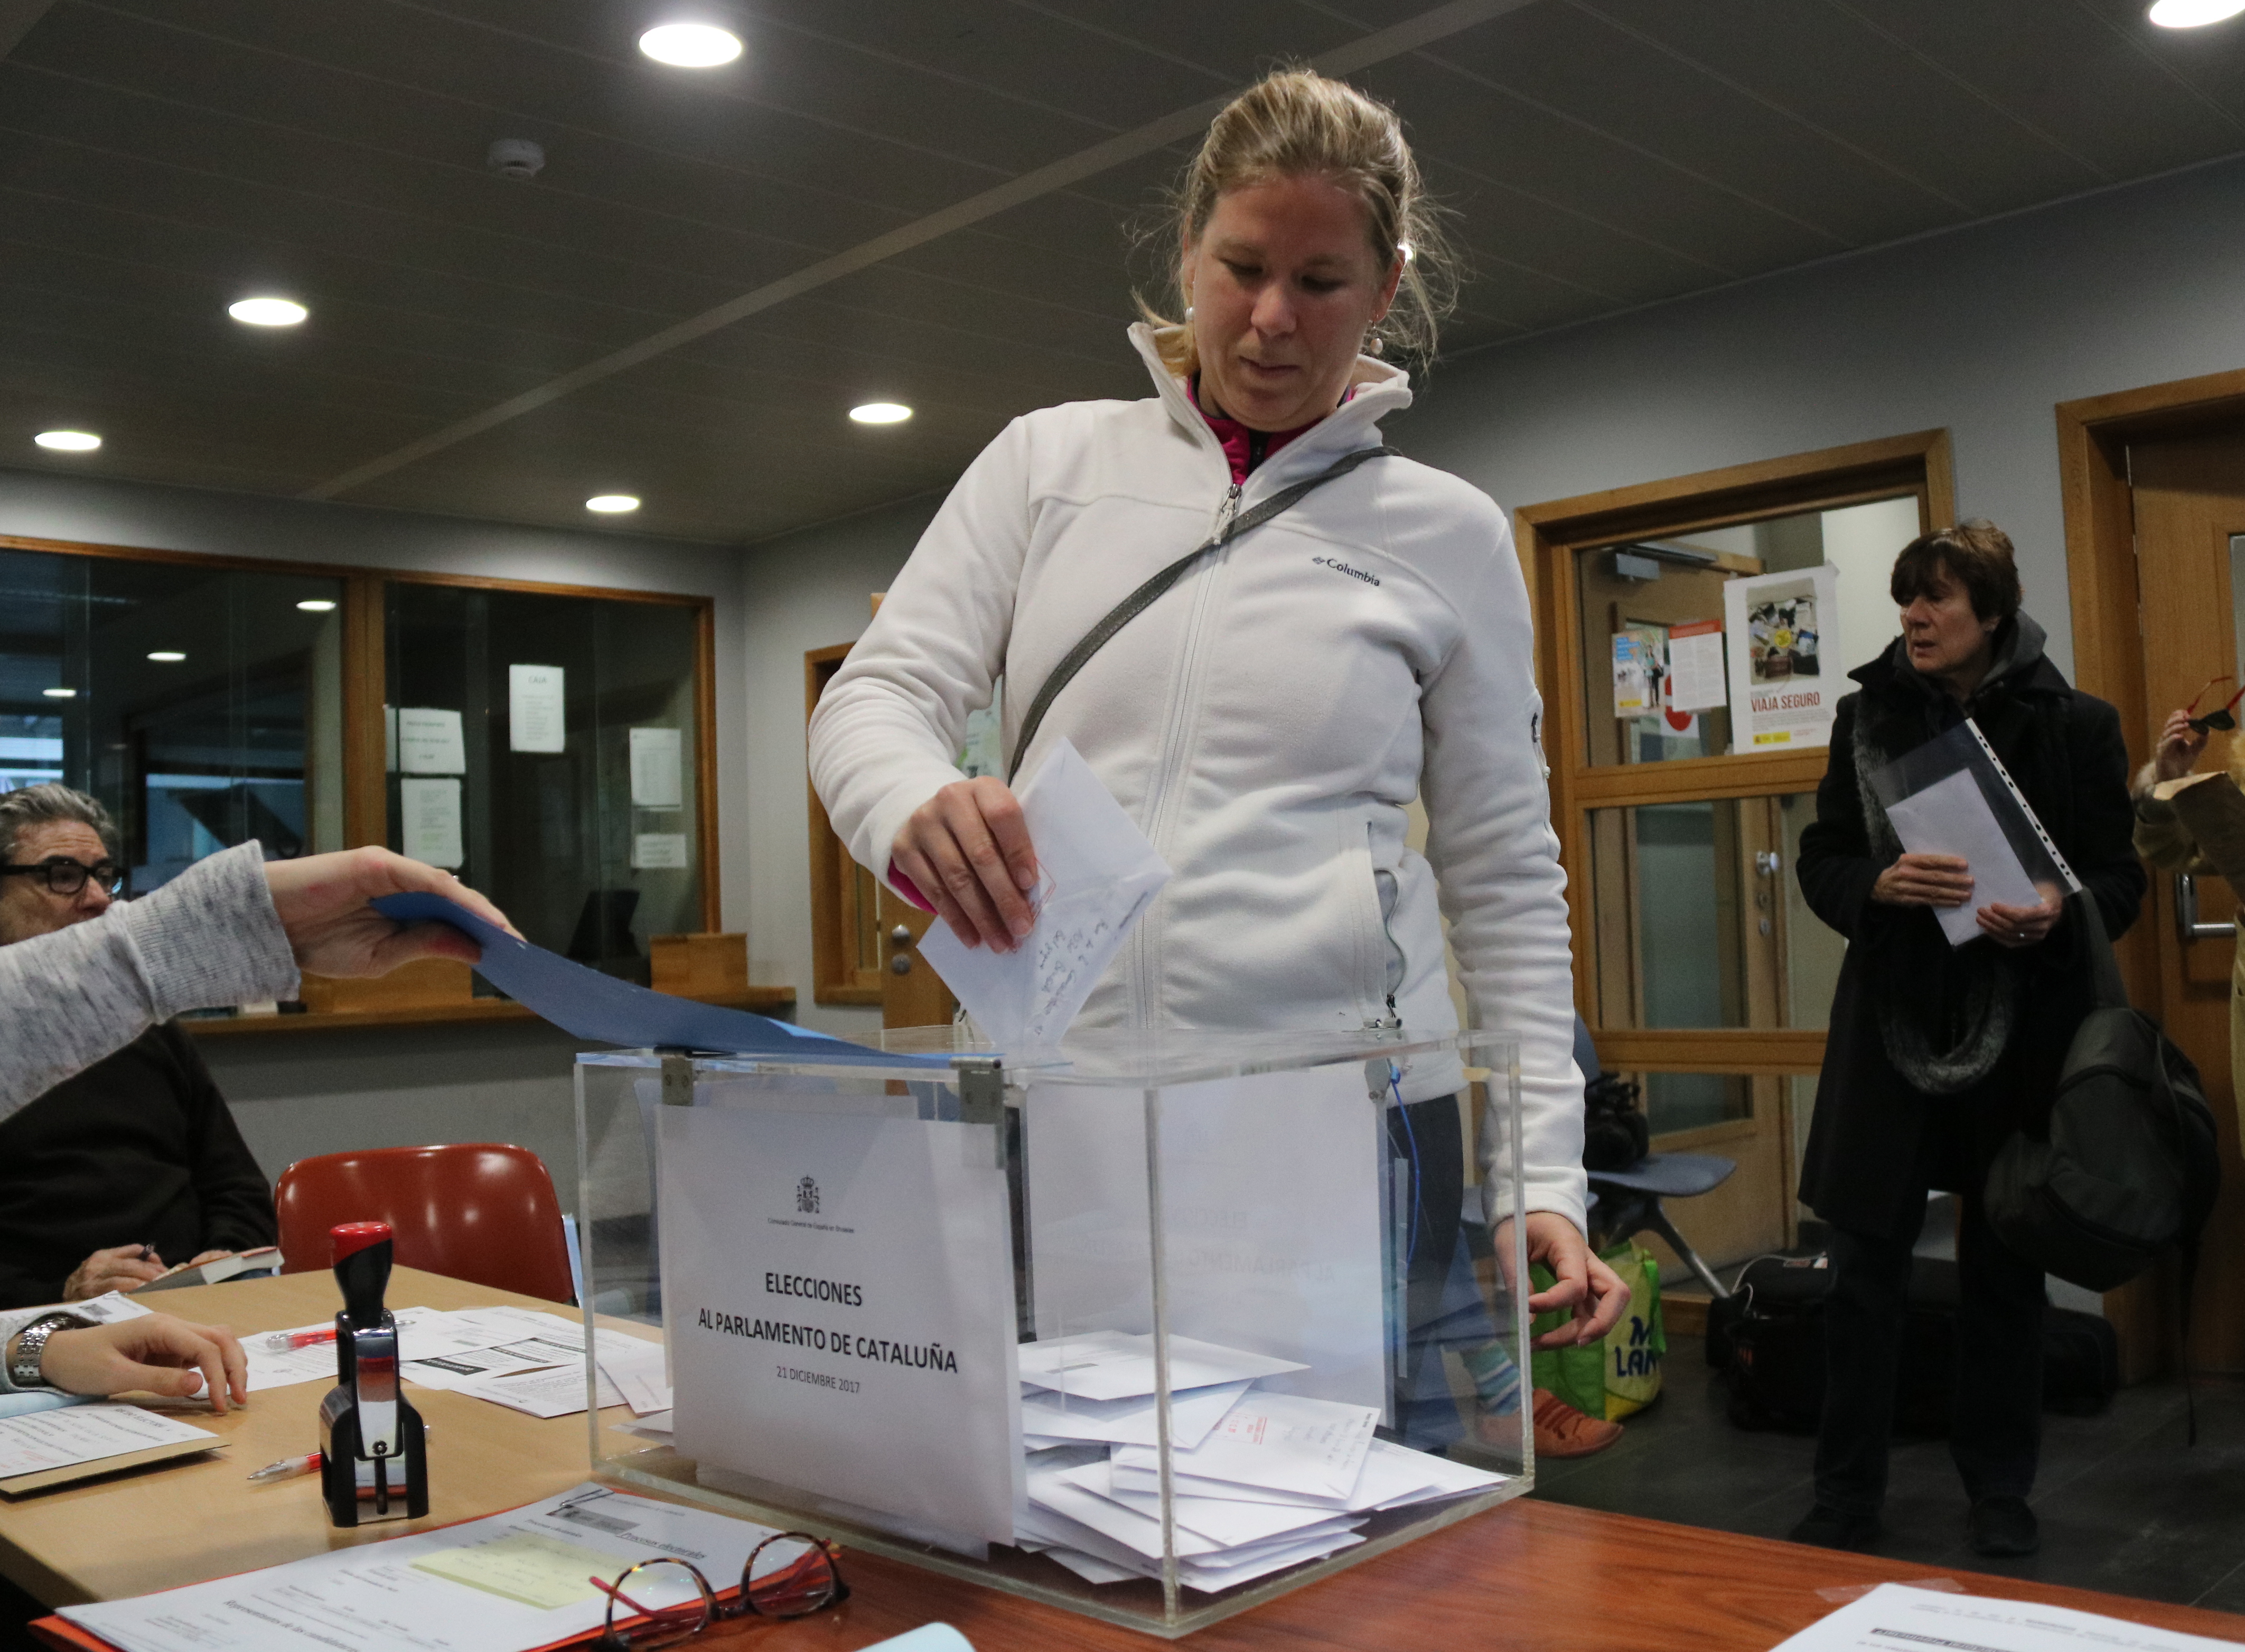 A Catalan living abroad casts her ballot on December 17 2017 in Brussels (by Blanca Blay)